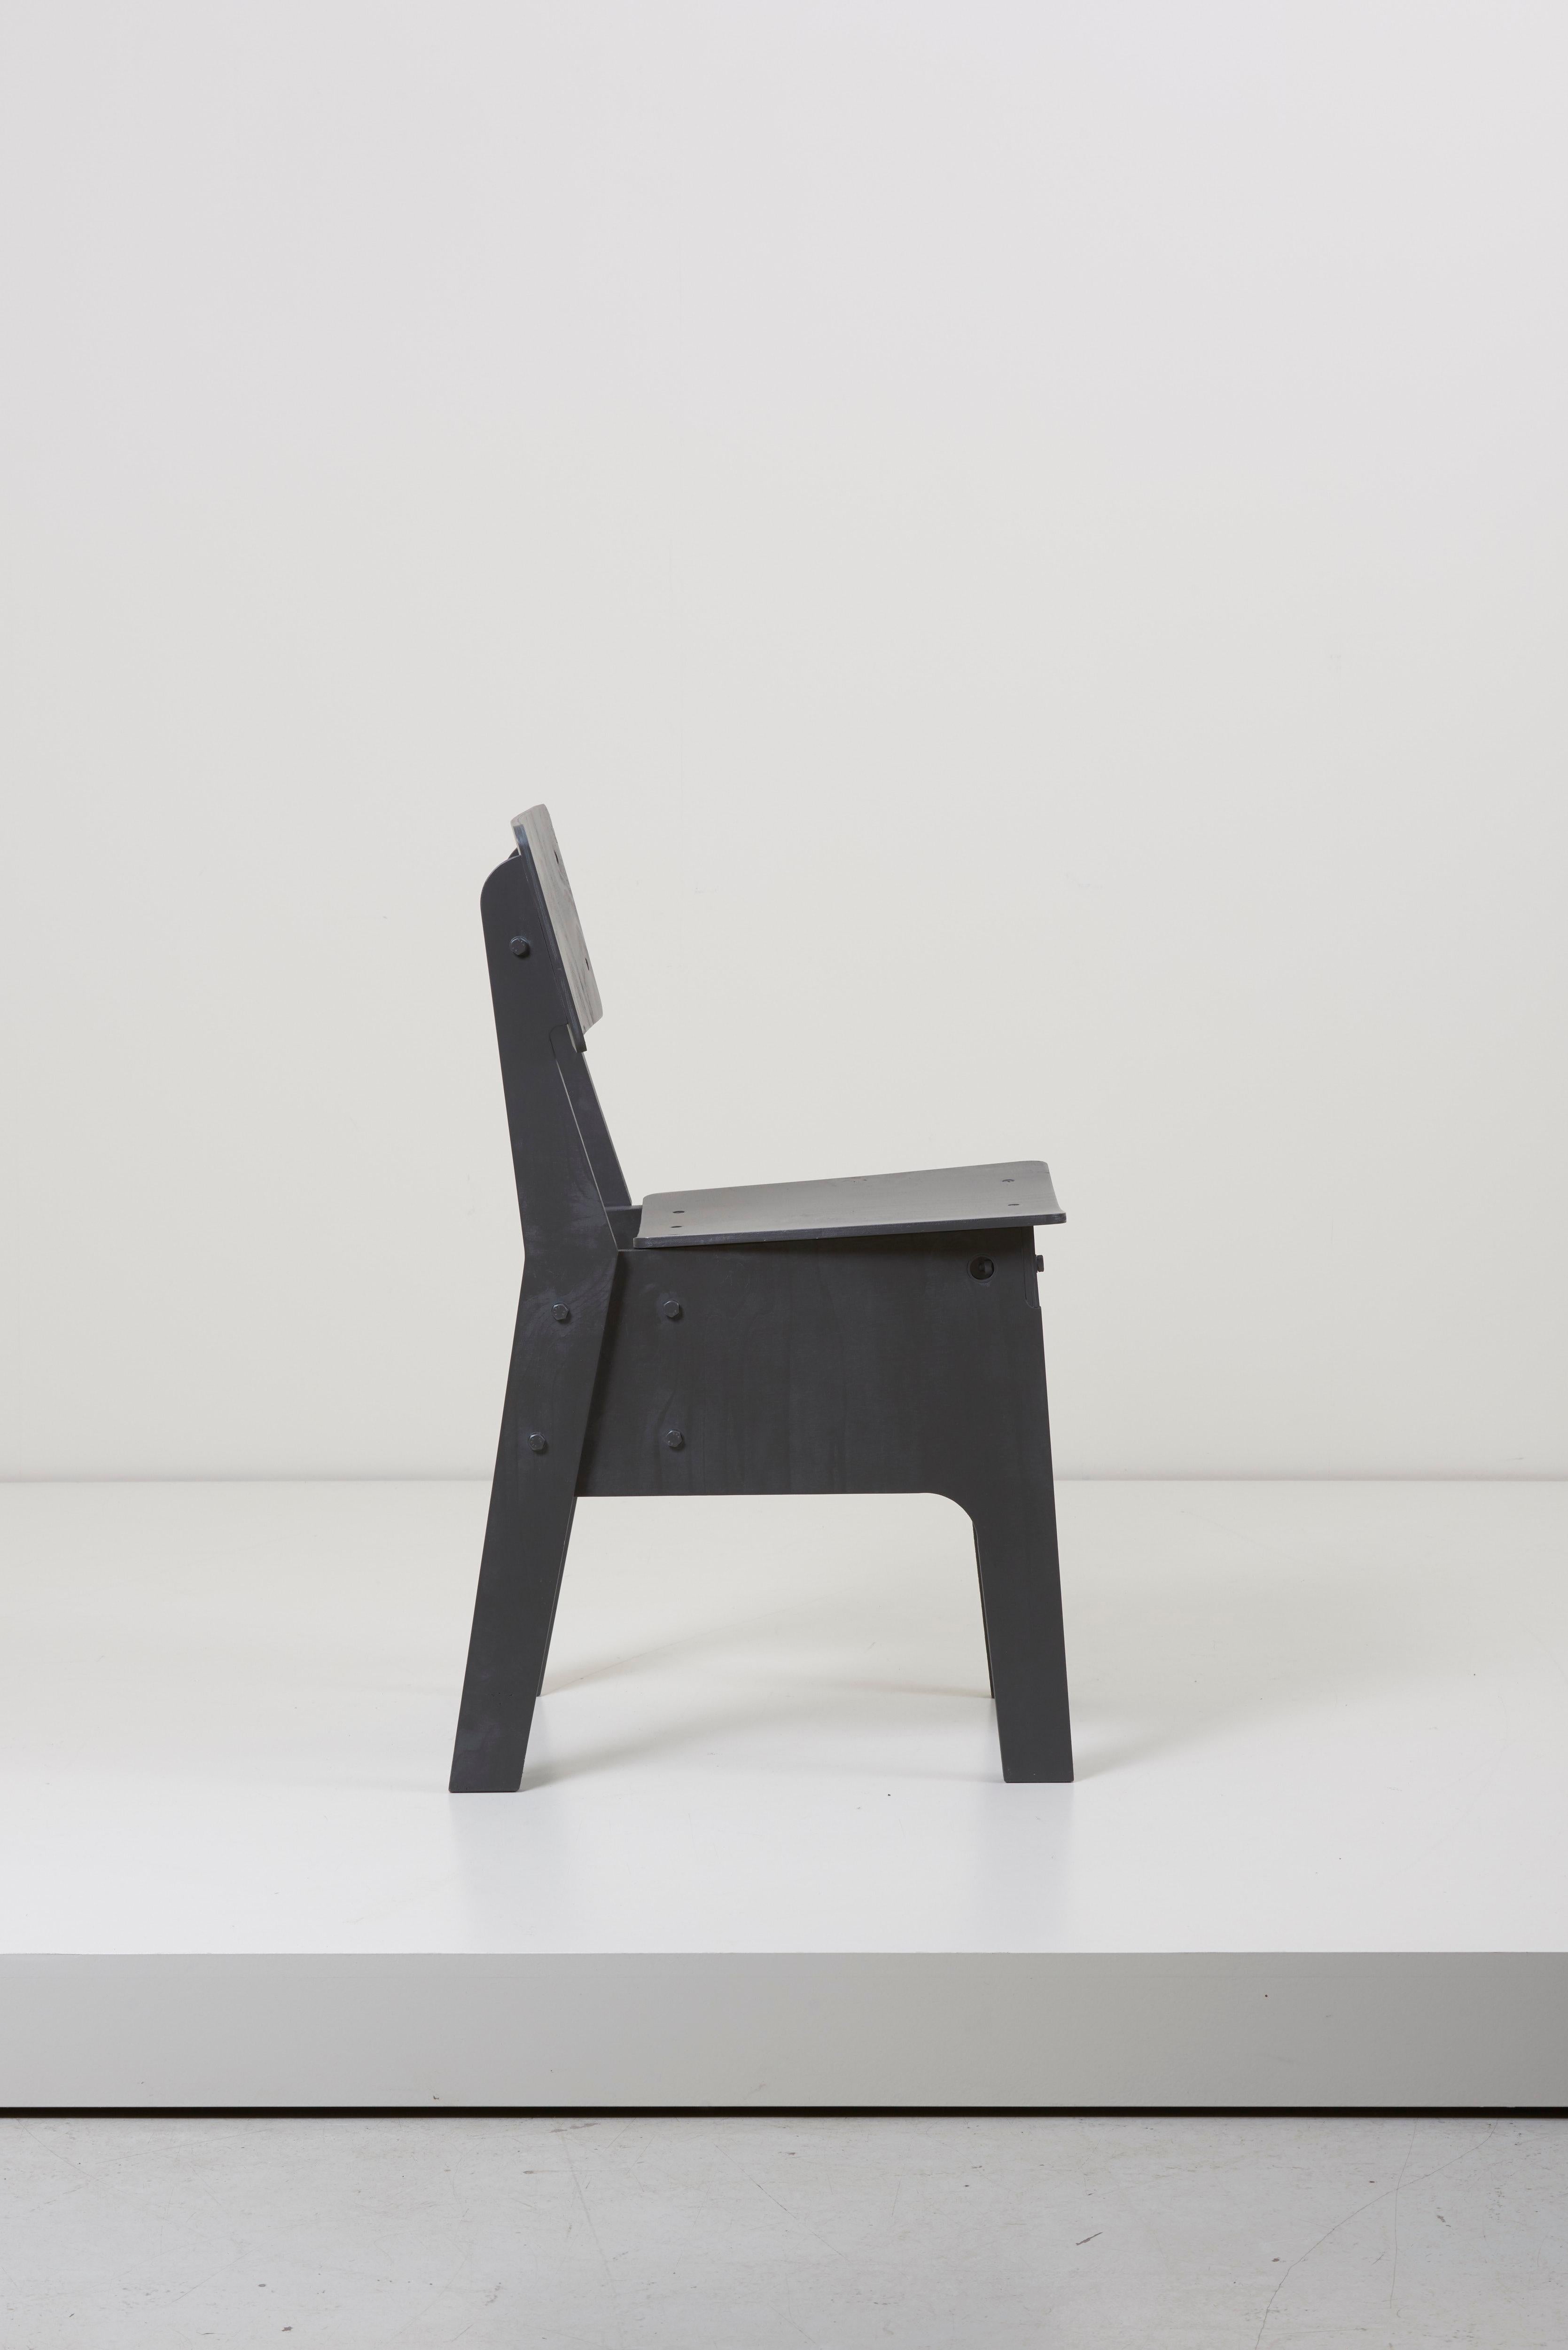 1 of 3 Crisis Chairs by Piet Hein Eek in Plywood 3